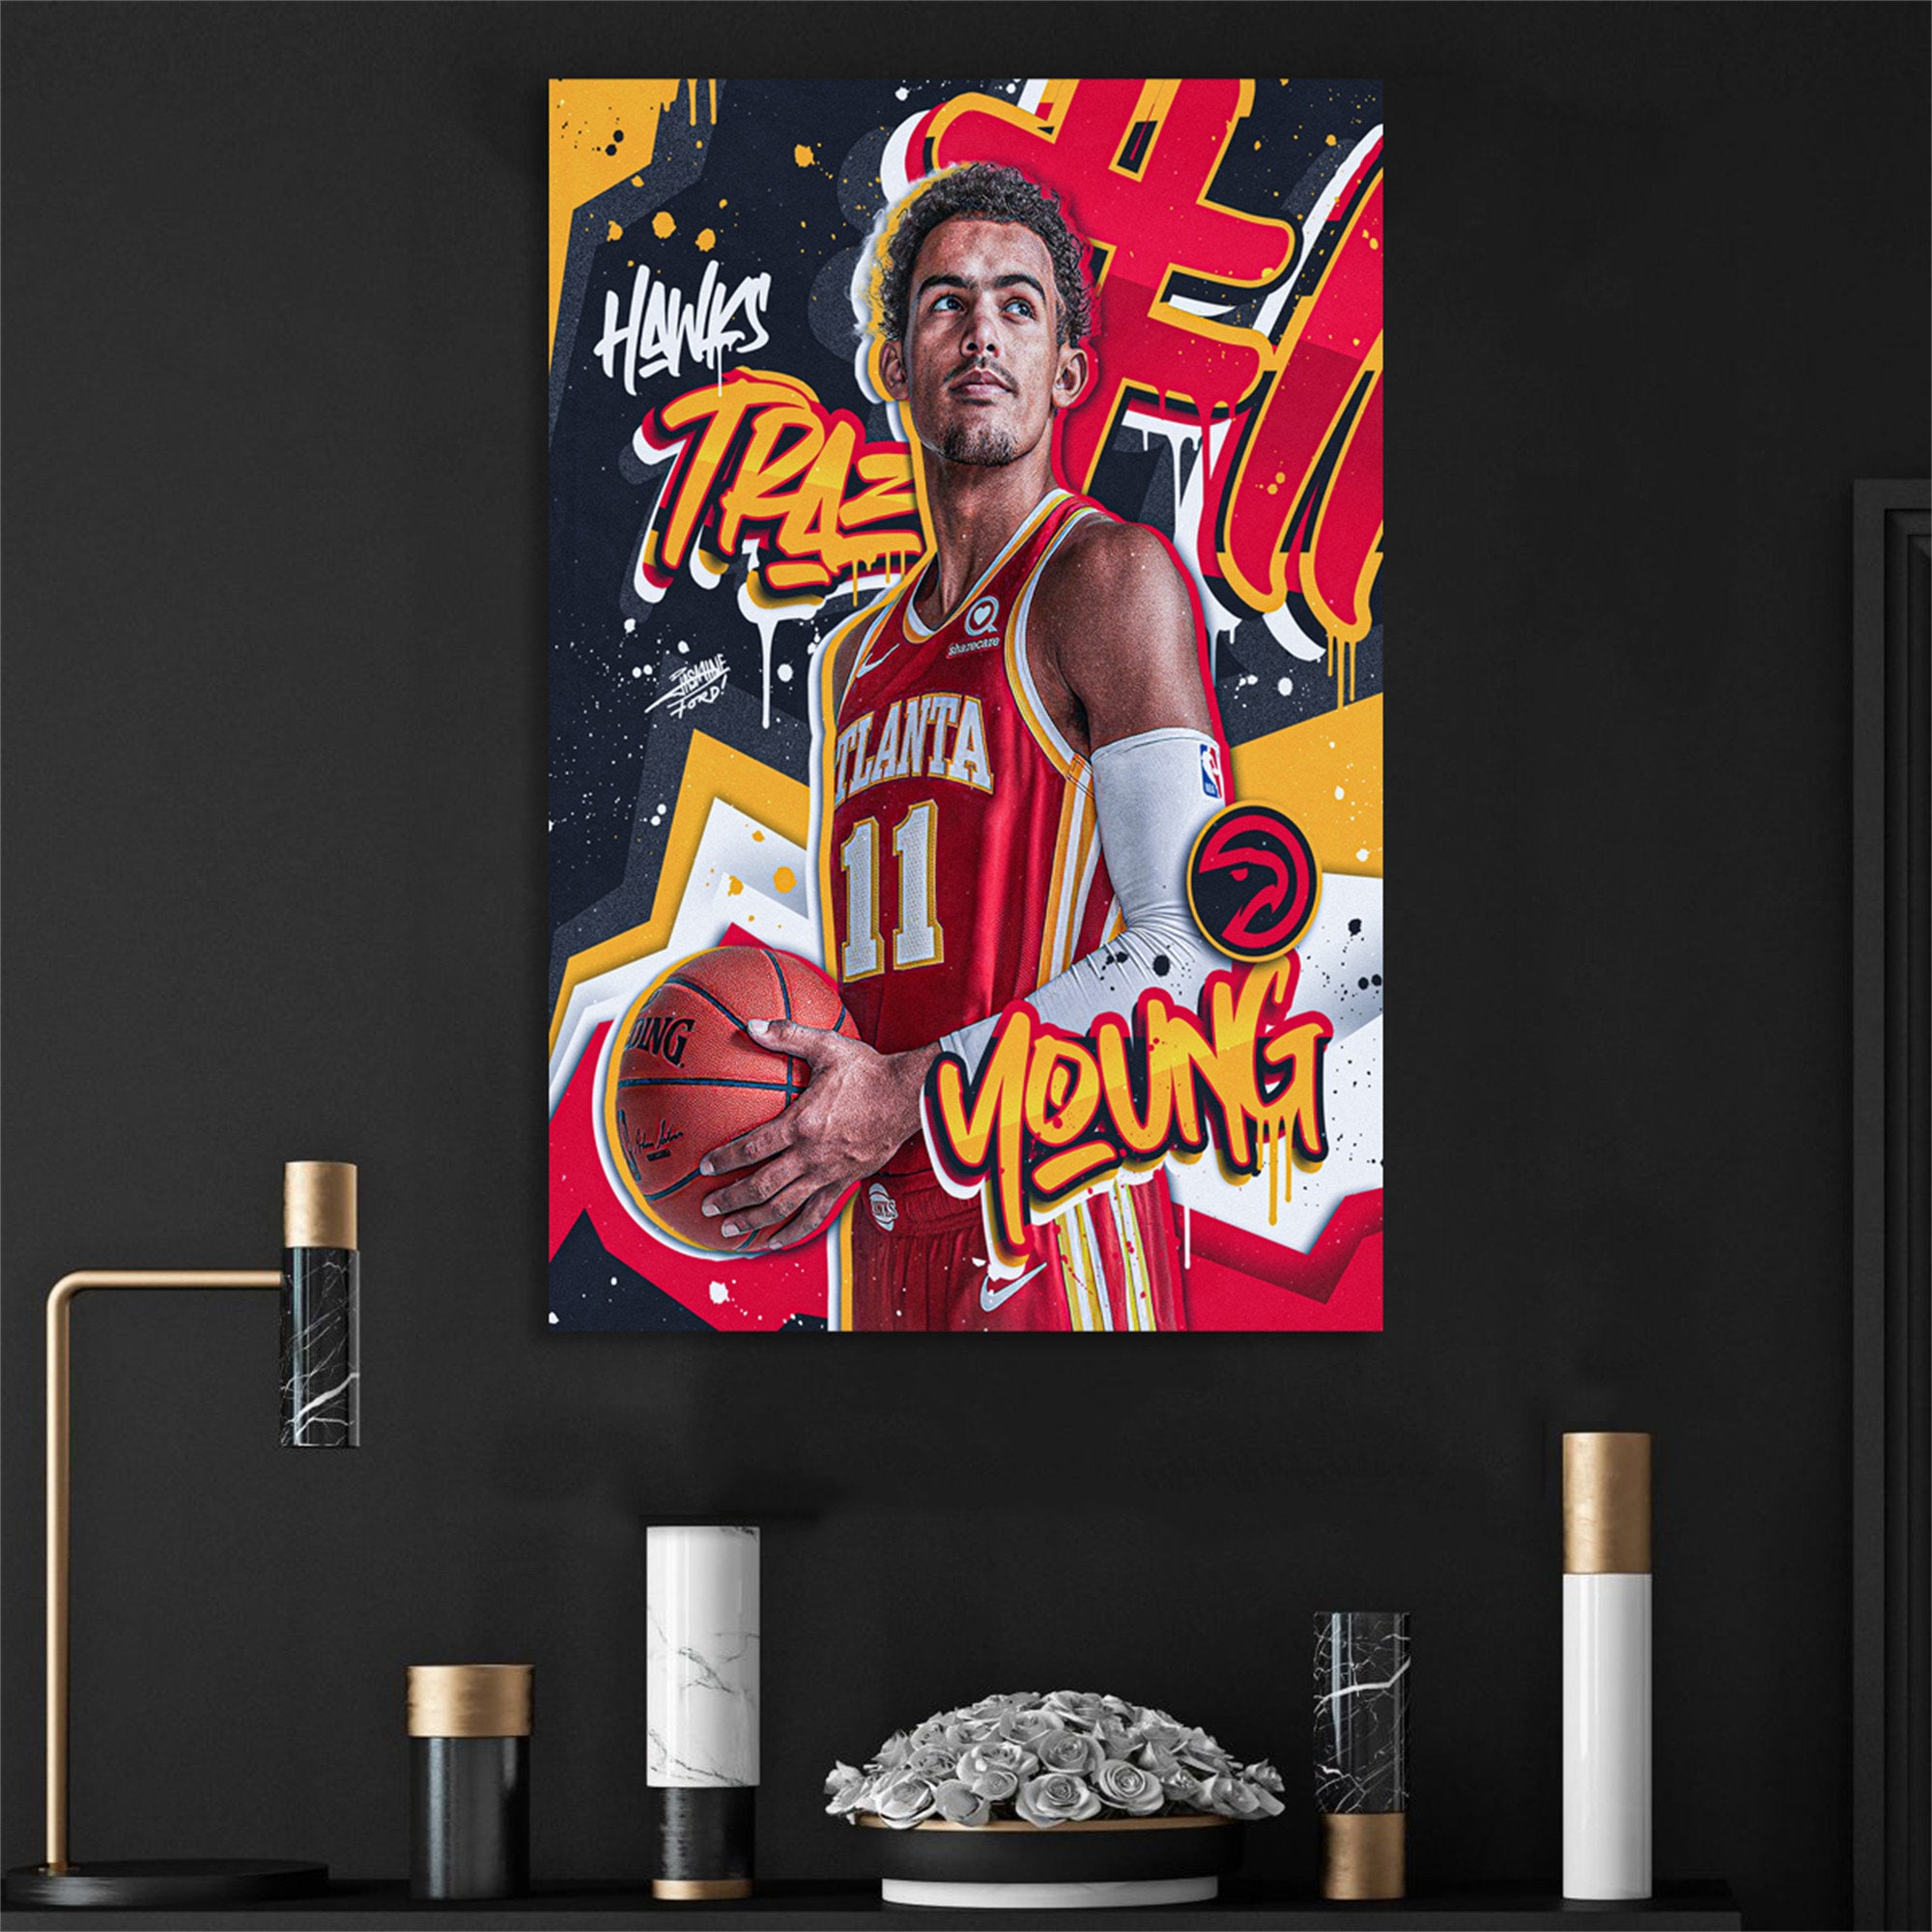 Atlanta Hawks: Trae Young 2021 Poster - Officially Licensed NBA